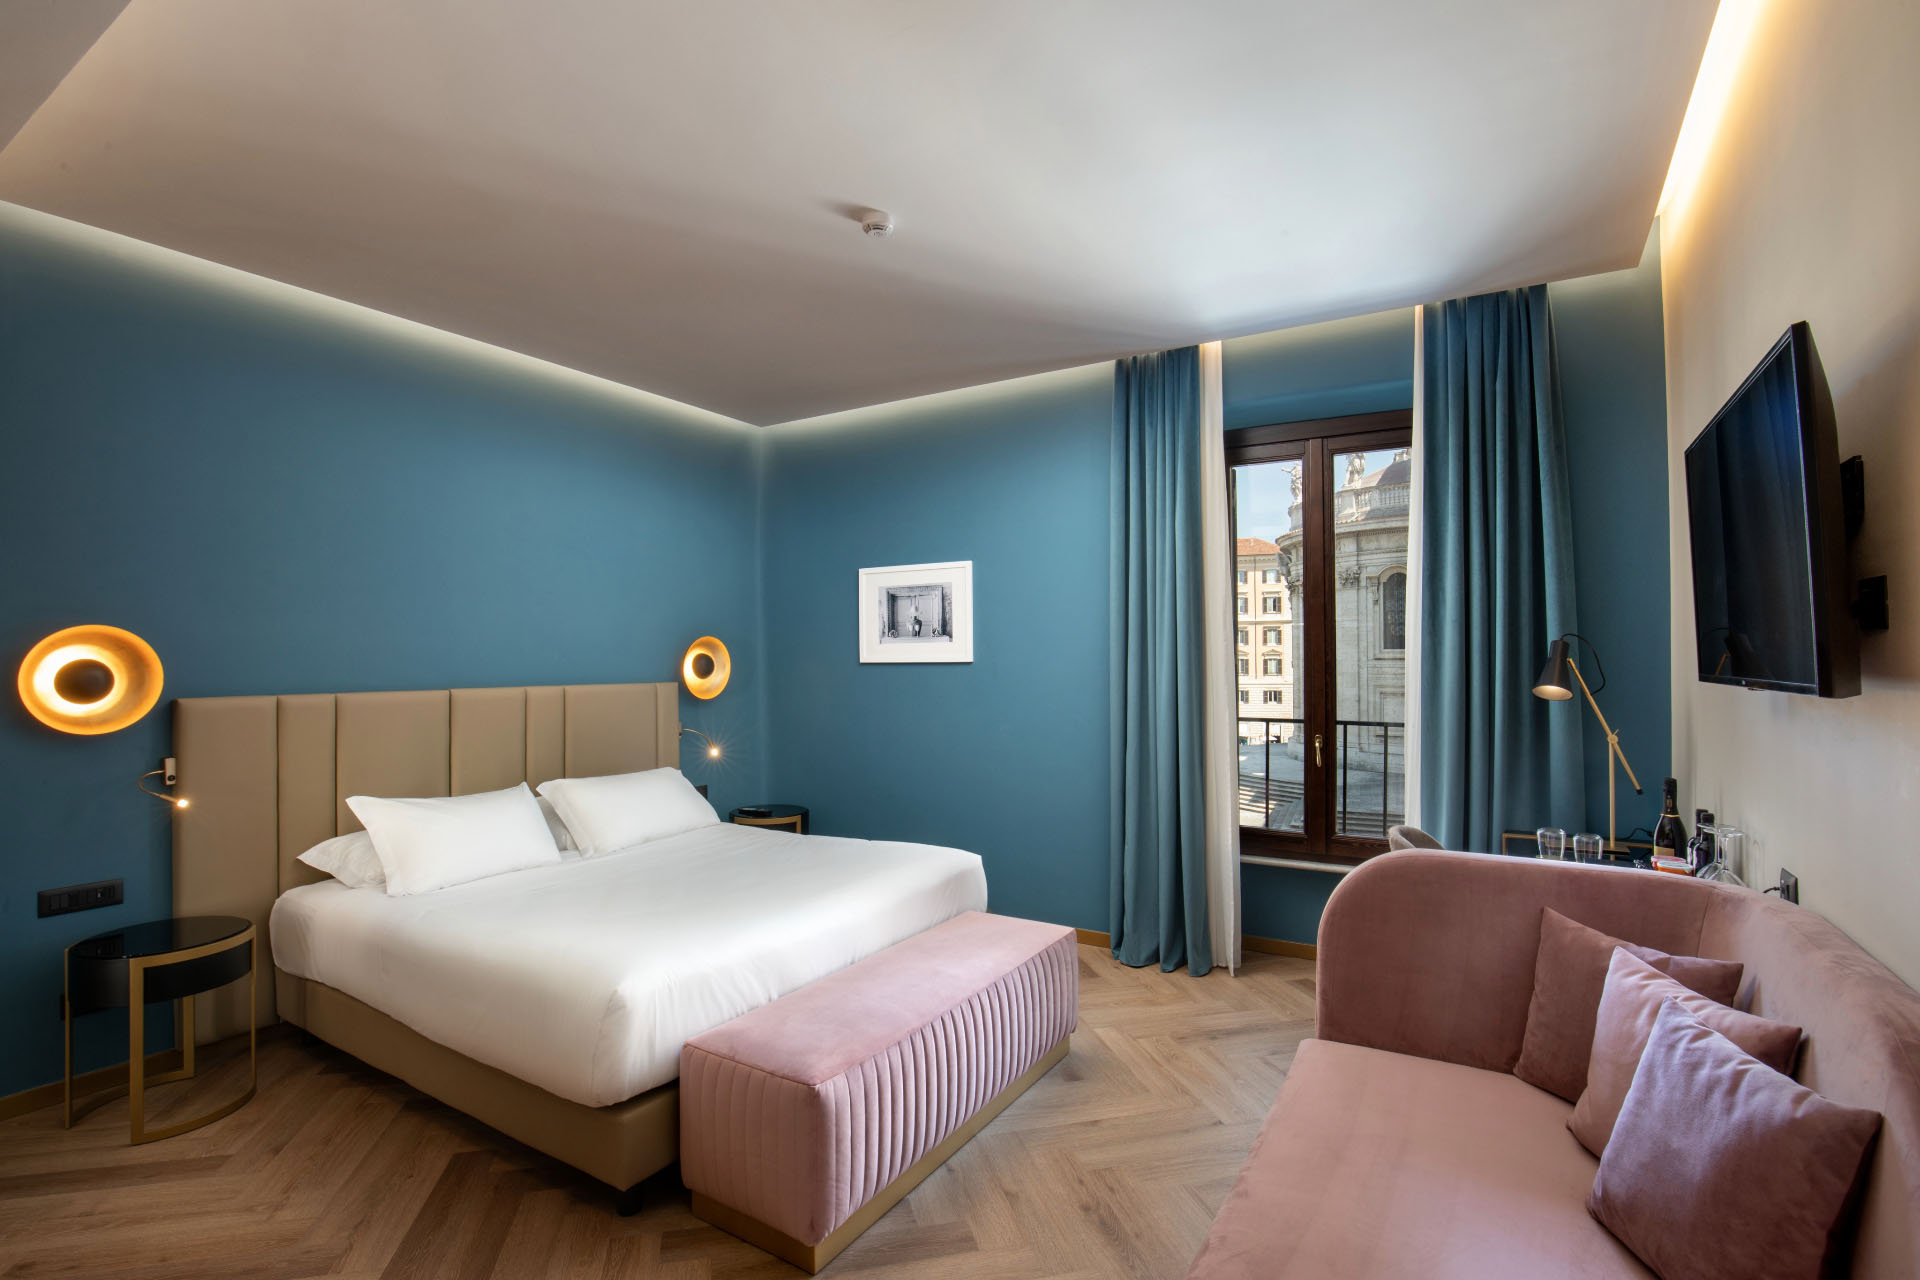 Hotel The Major: the essence of Rome through the language of architecture